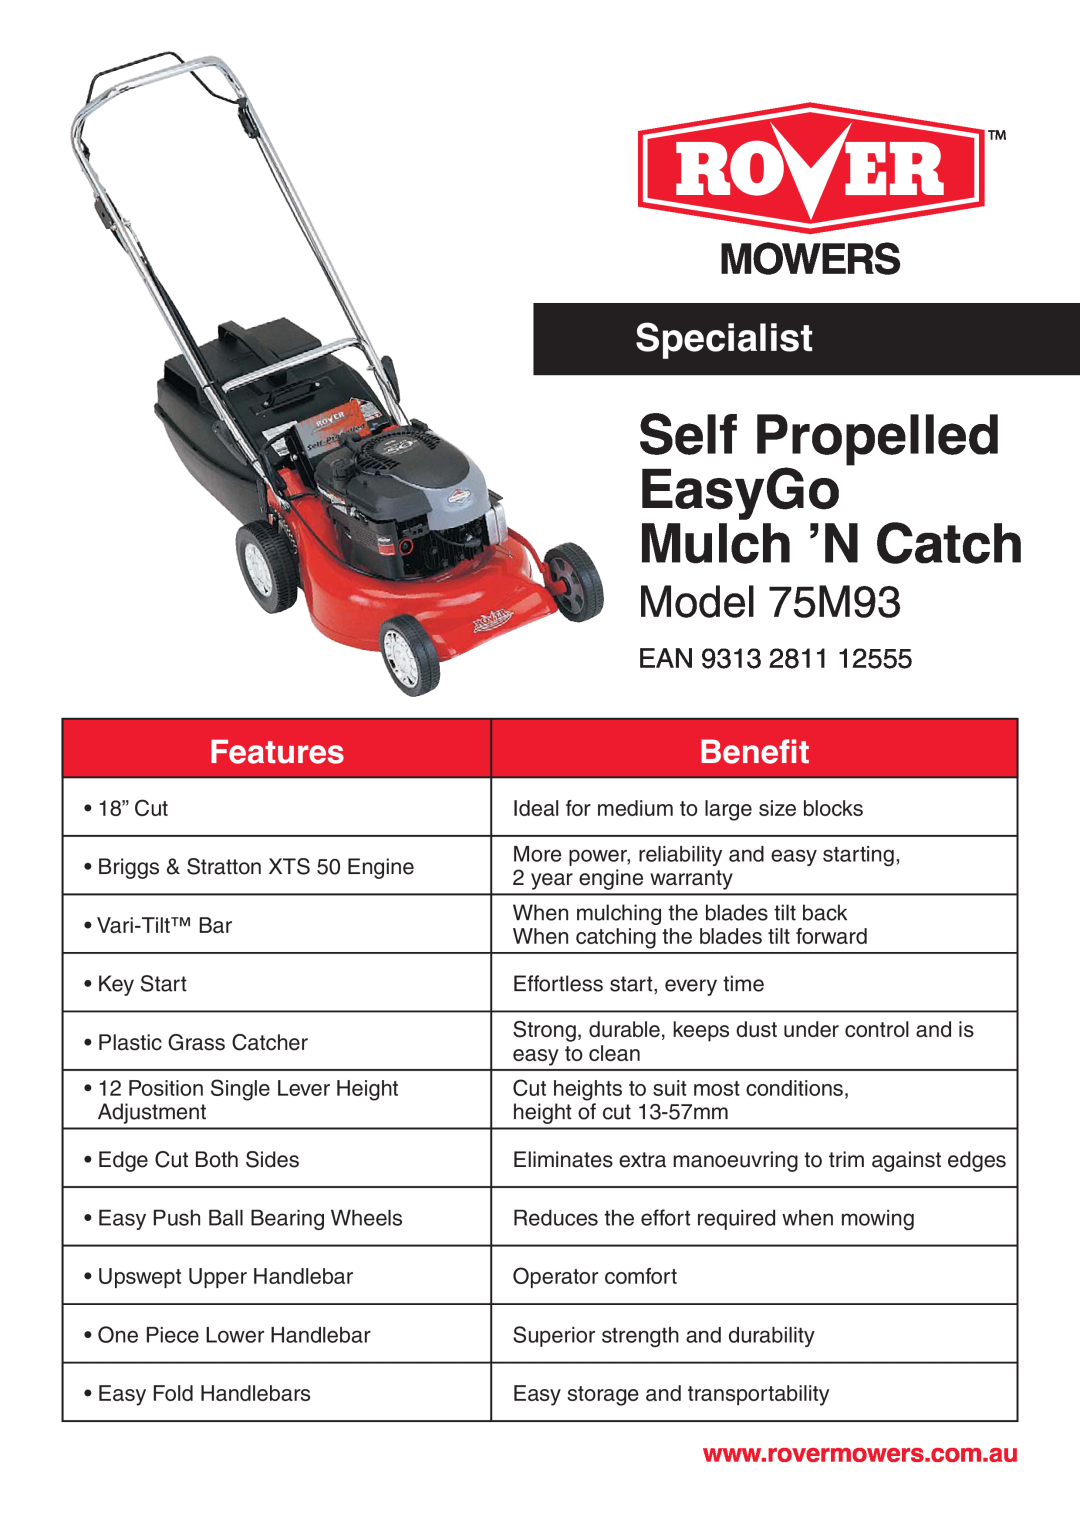 Rover warranty Self Propelled, EasyGo, Mulch ʼN Catch, Model 75M93, Specialist, Features, Benefit, Ean 